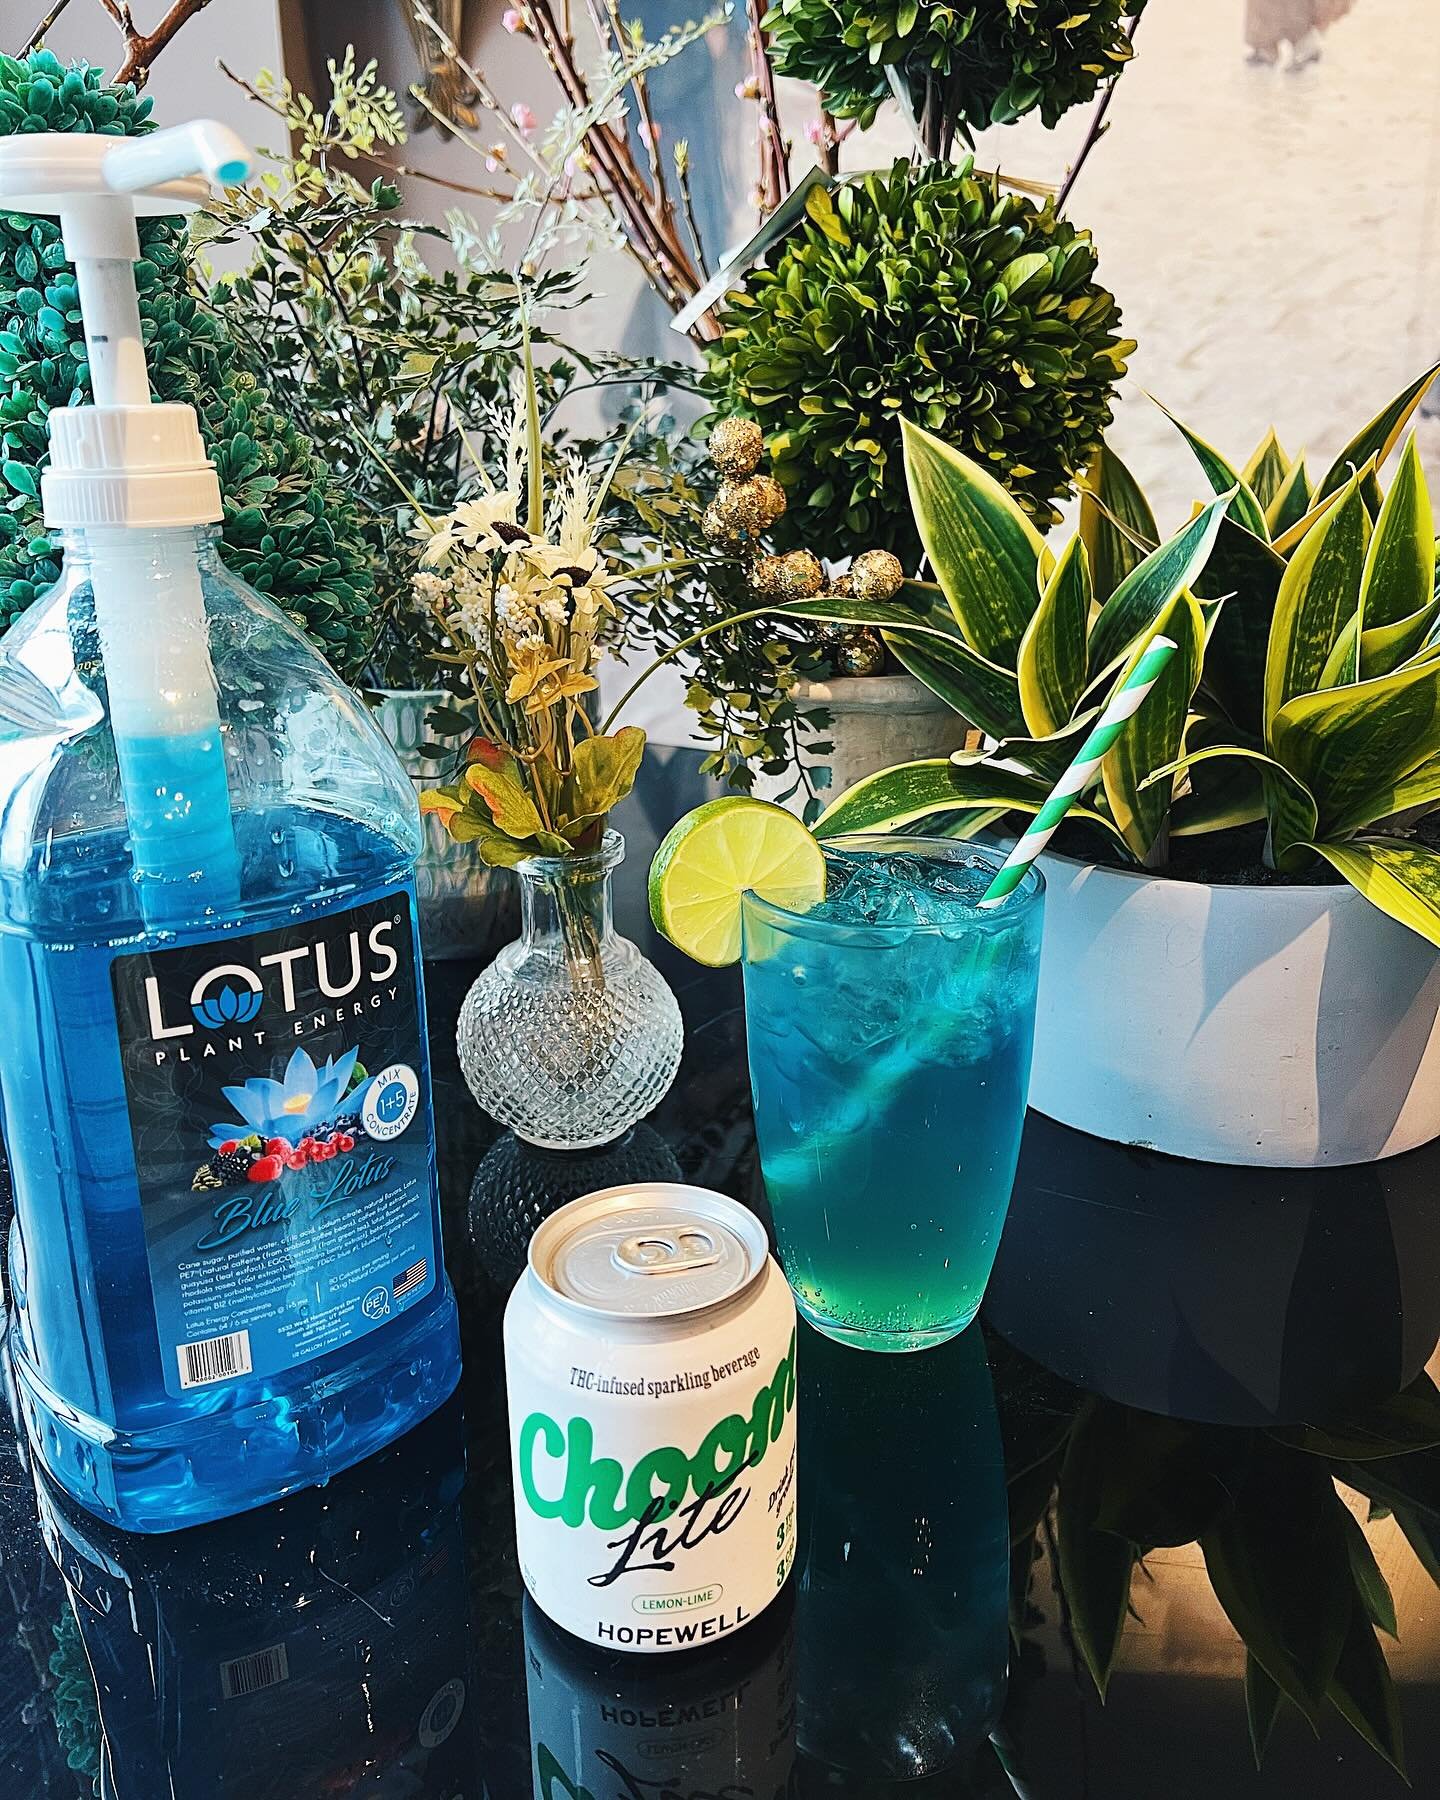 TODAY ONLY! For 4/20 we&rsquo;ll be making our &lsquo;Choom Lotus&rsquo;! Featuring Hopewell&rsquo;s &lsquo;Choom&rsquo; THC-infused beverage, passionfruit syrup, and our blue lotus! 🫧 💚

Come feel the vibes and have a great day! 😎

#DowntownArlin